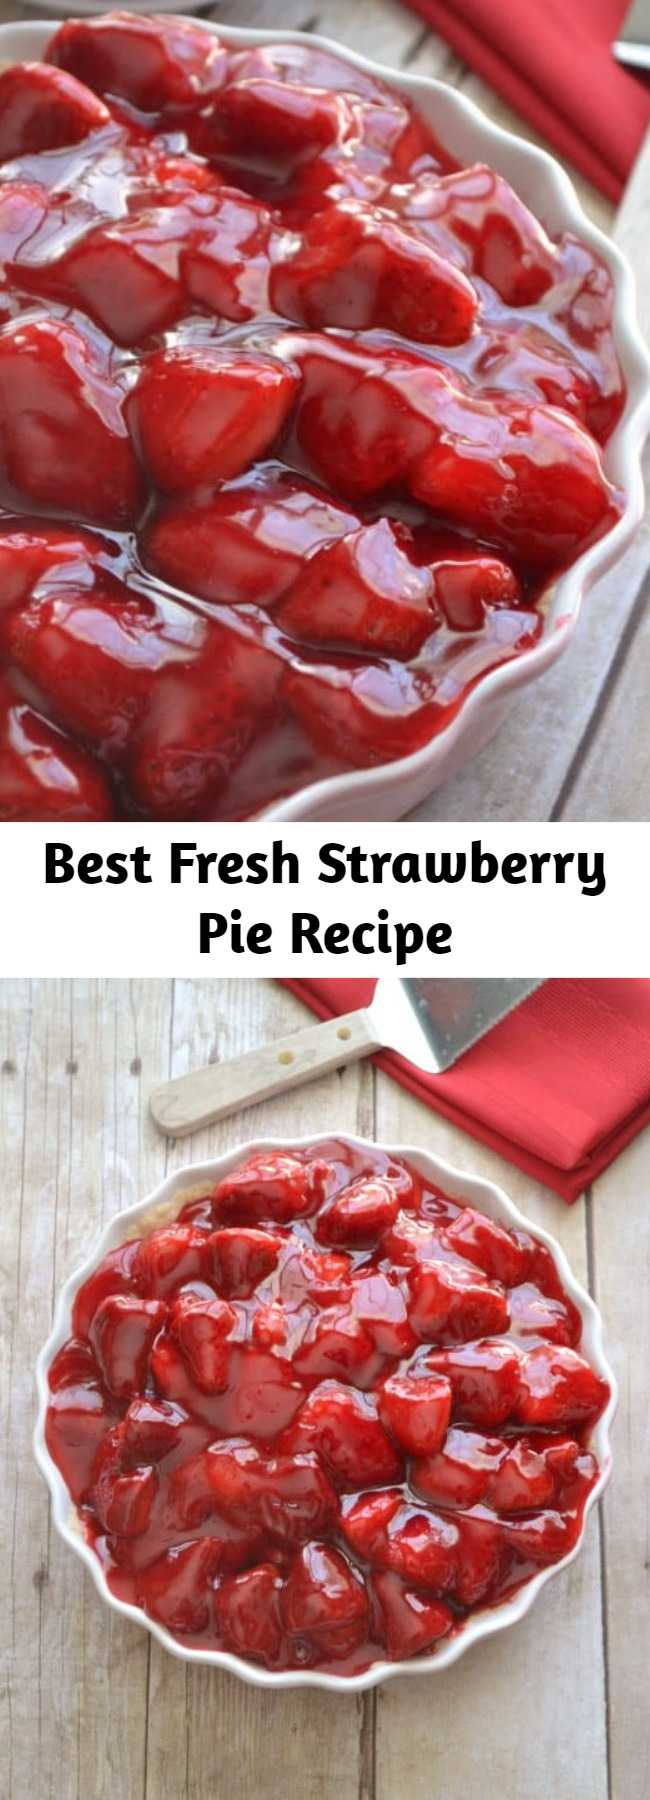 Best Fresh Strawberry Pie Recipe - This Strawberry Pie has fresh strawberries mounded high in a rich, buttery crust. A little (or big) slice of delicious. The perfect summer dessert and my favorite strawberry pie!